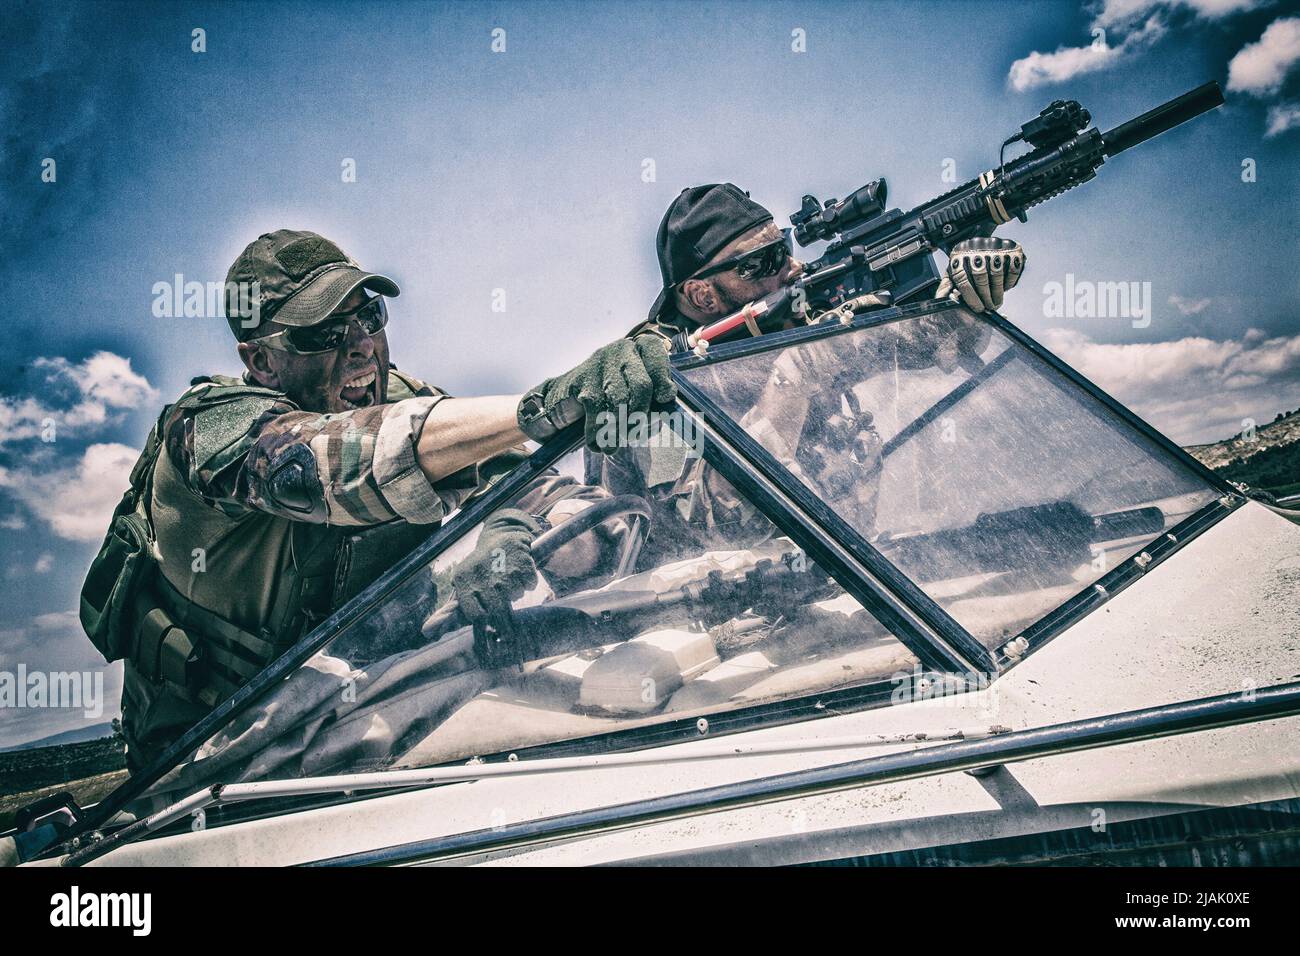 Armed Navy SEALs attacking their enemy while on a boat. Stock Photo